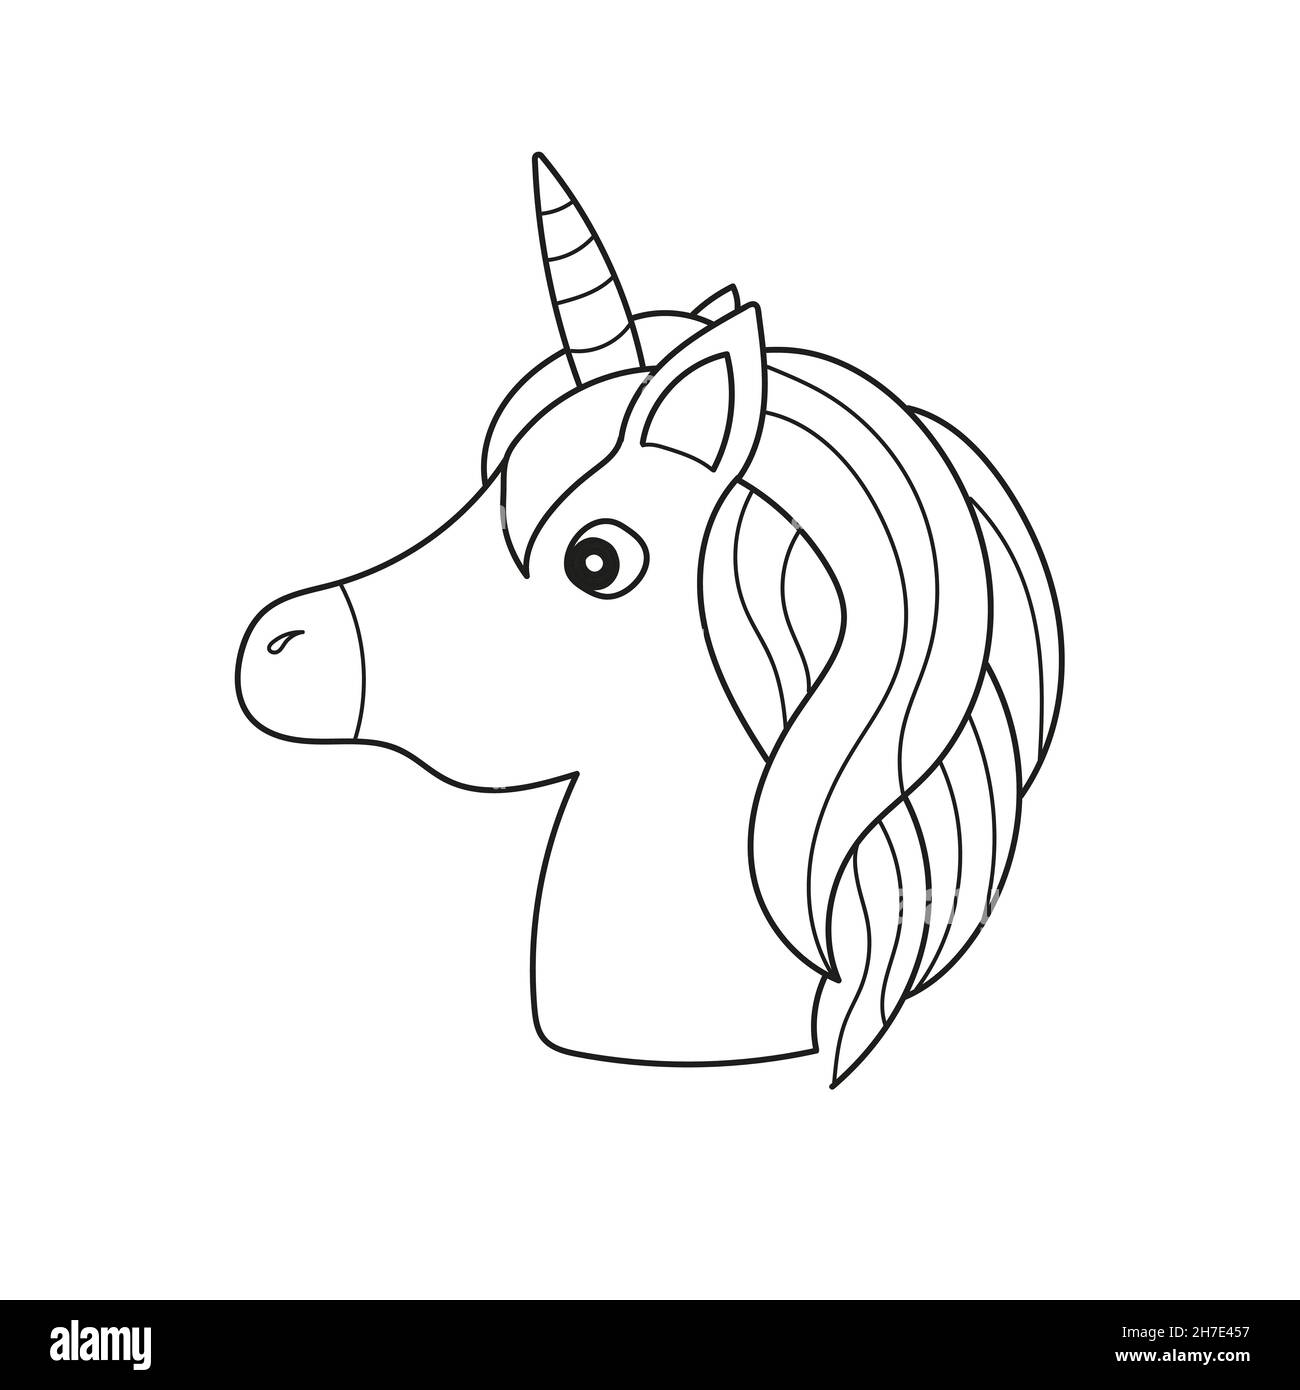 Simple coloring page unicorn magical animal vector artwork black and white coloring book pages for kids stock vector image art